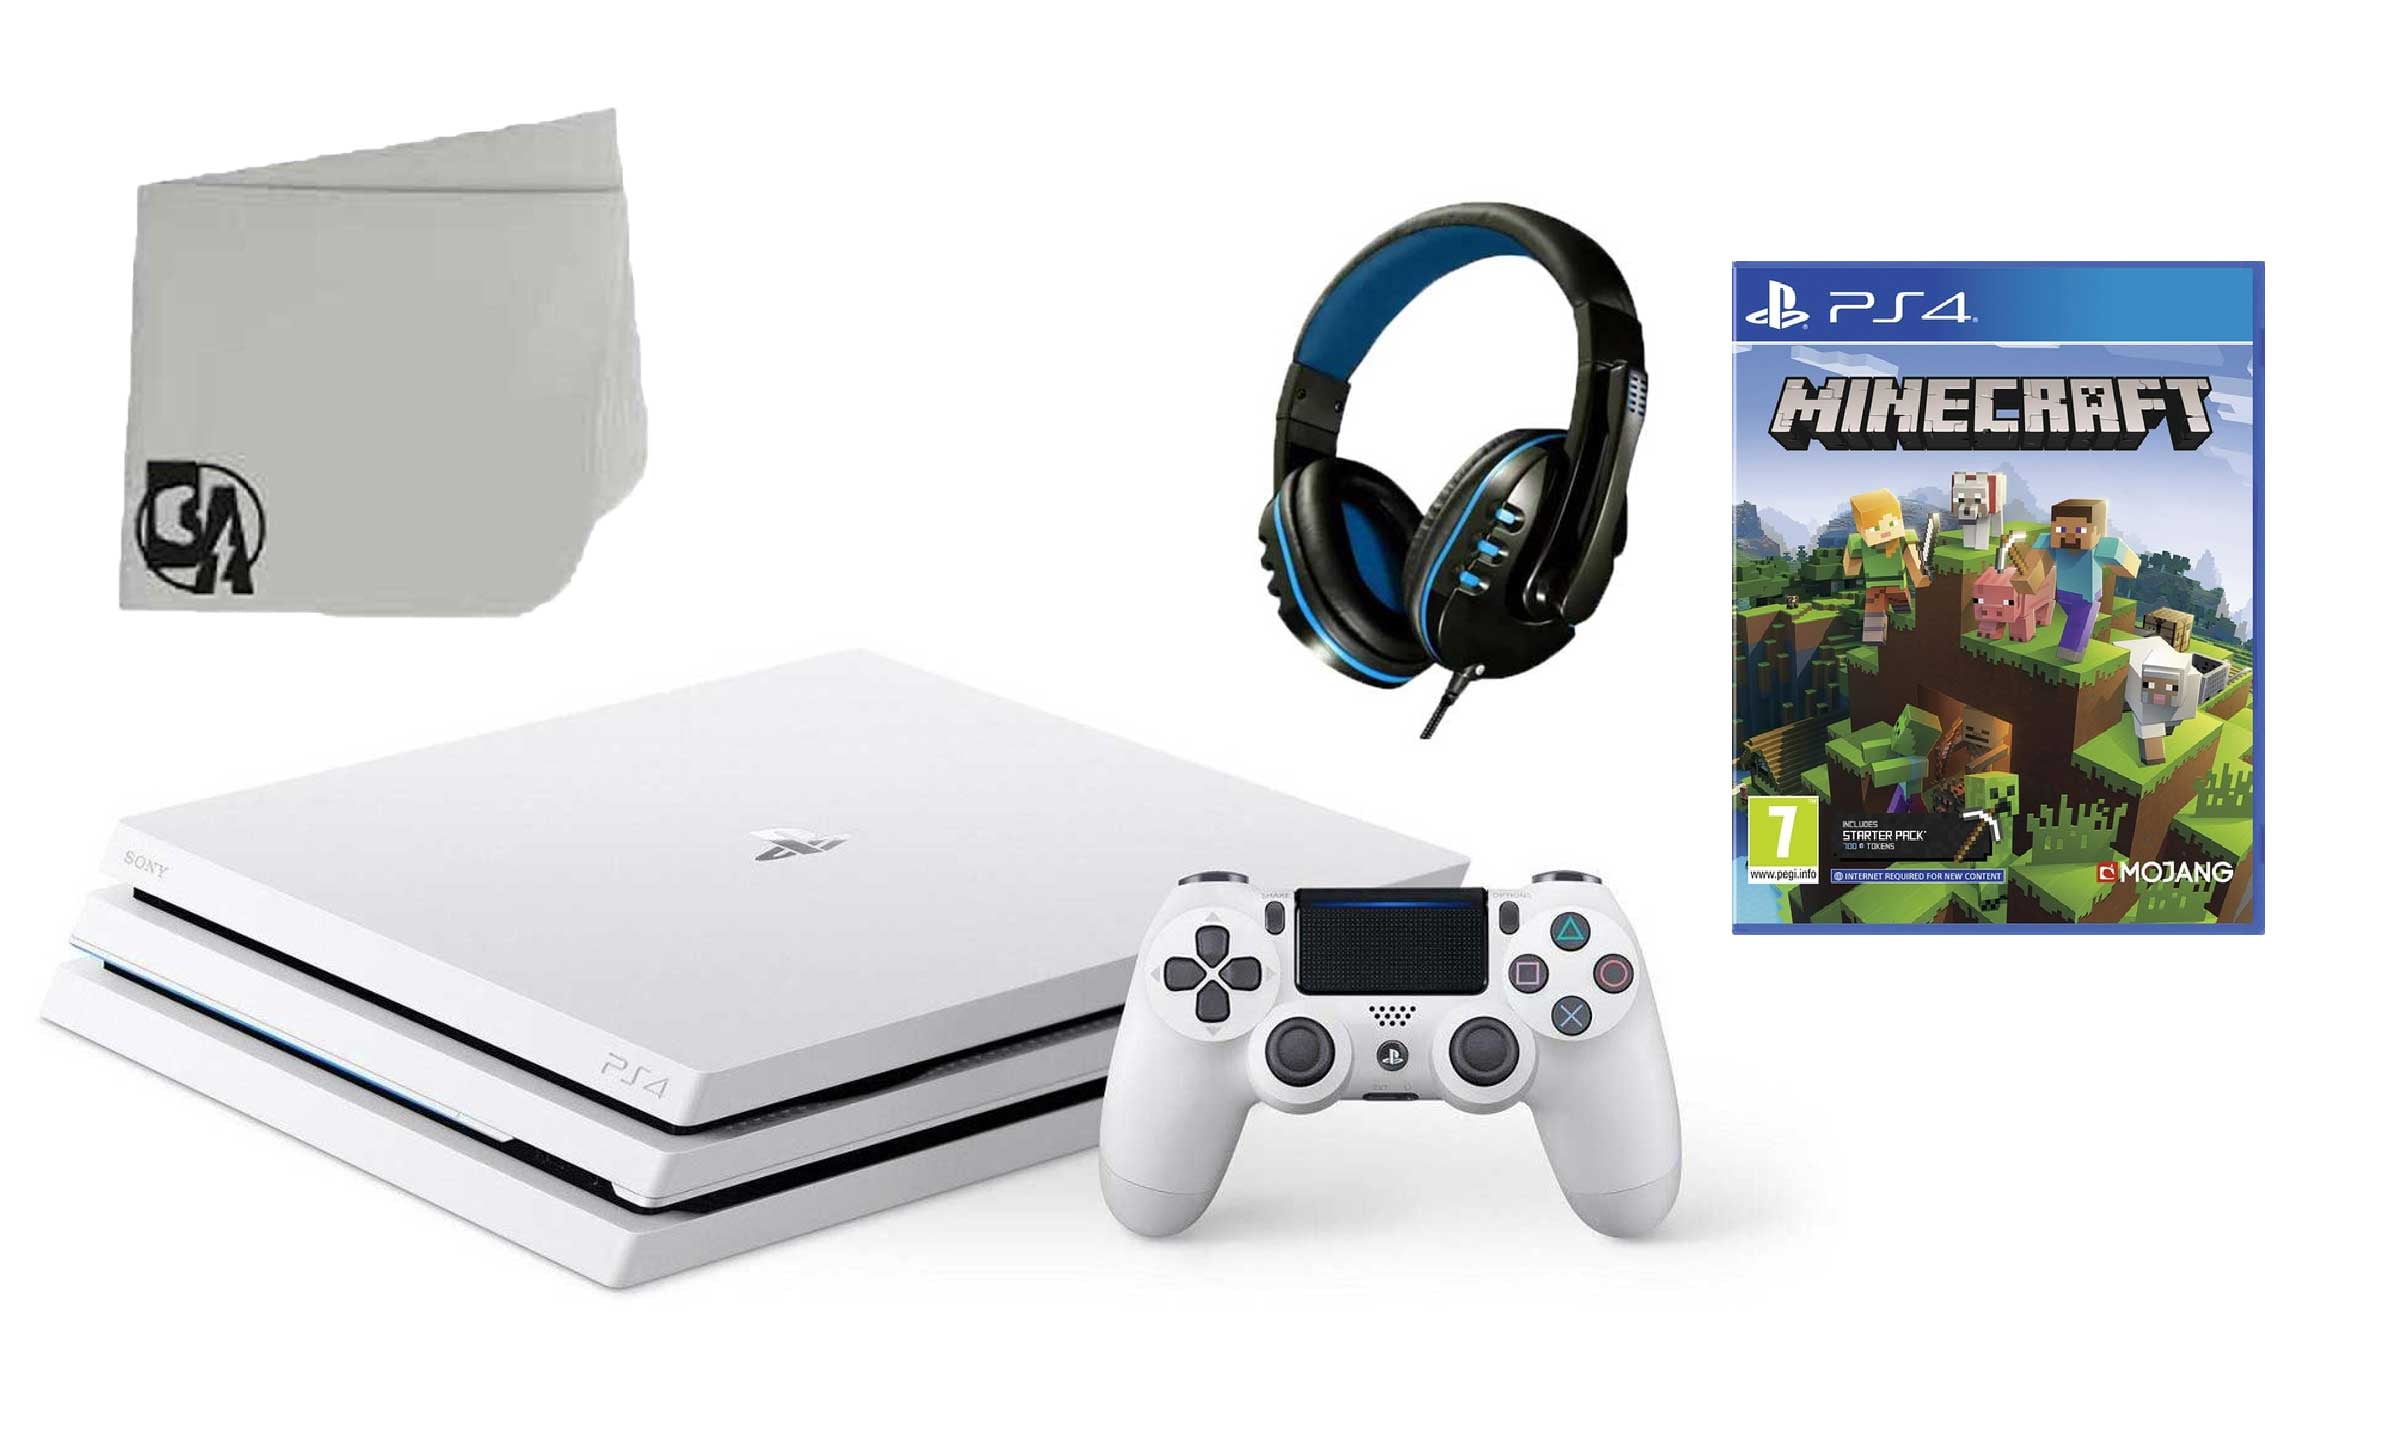 Sony PlayStation 4 PRO Glacier 1TB Gaming Console White with Minecraft BOLT  AXTION Bundle Used